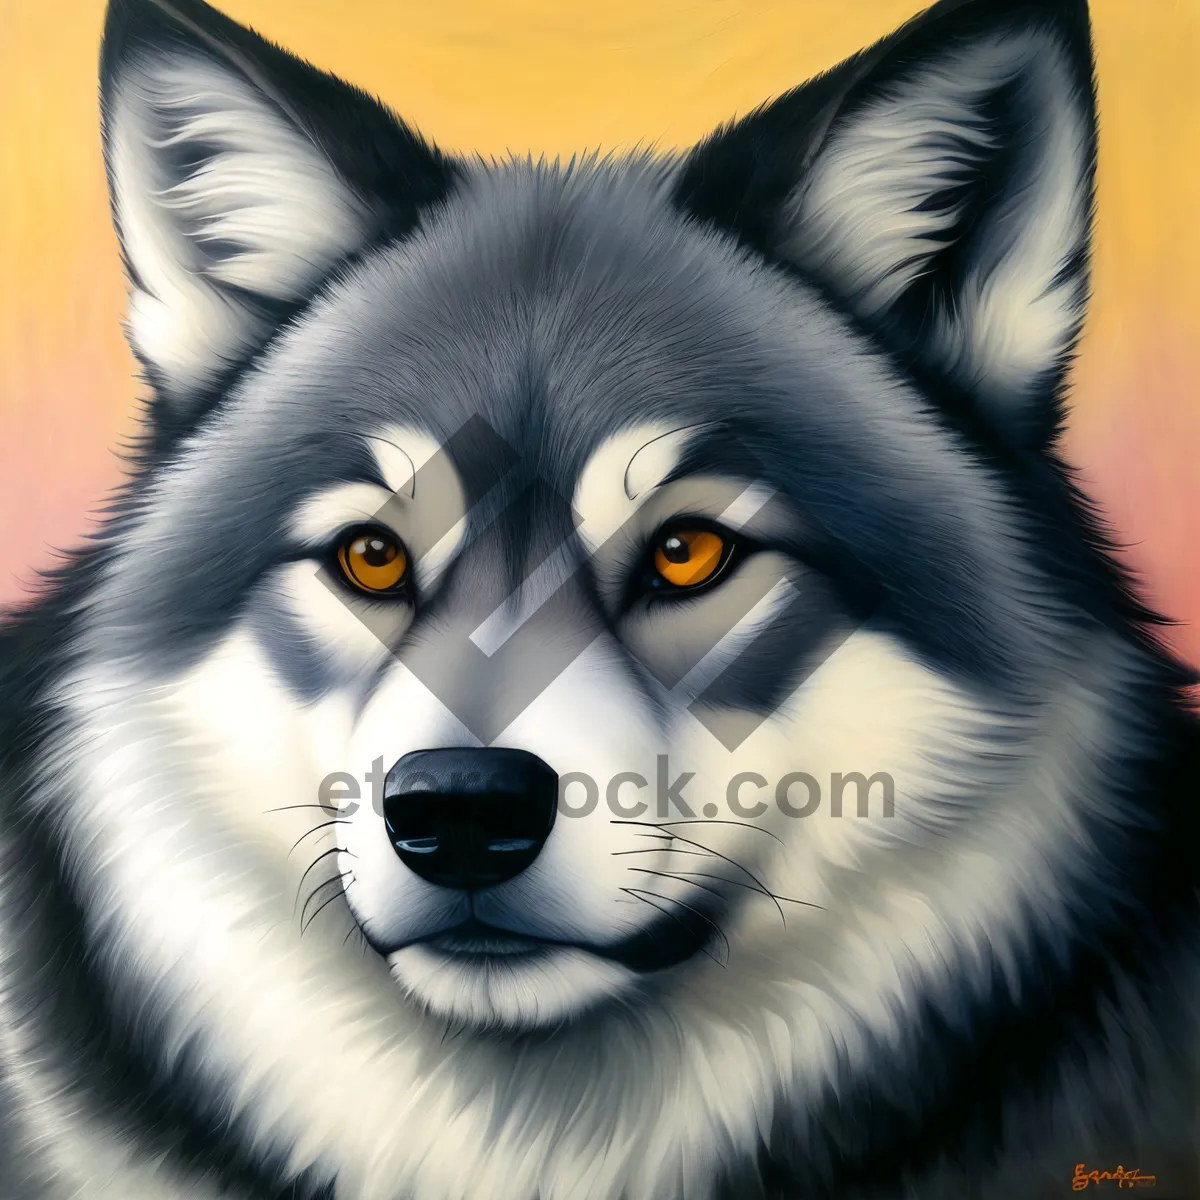 Picture of Cute Malamute Husky with Piercing Eyes